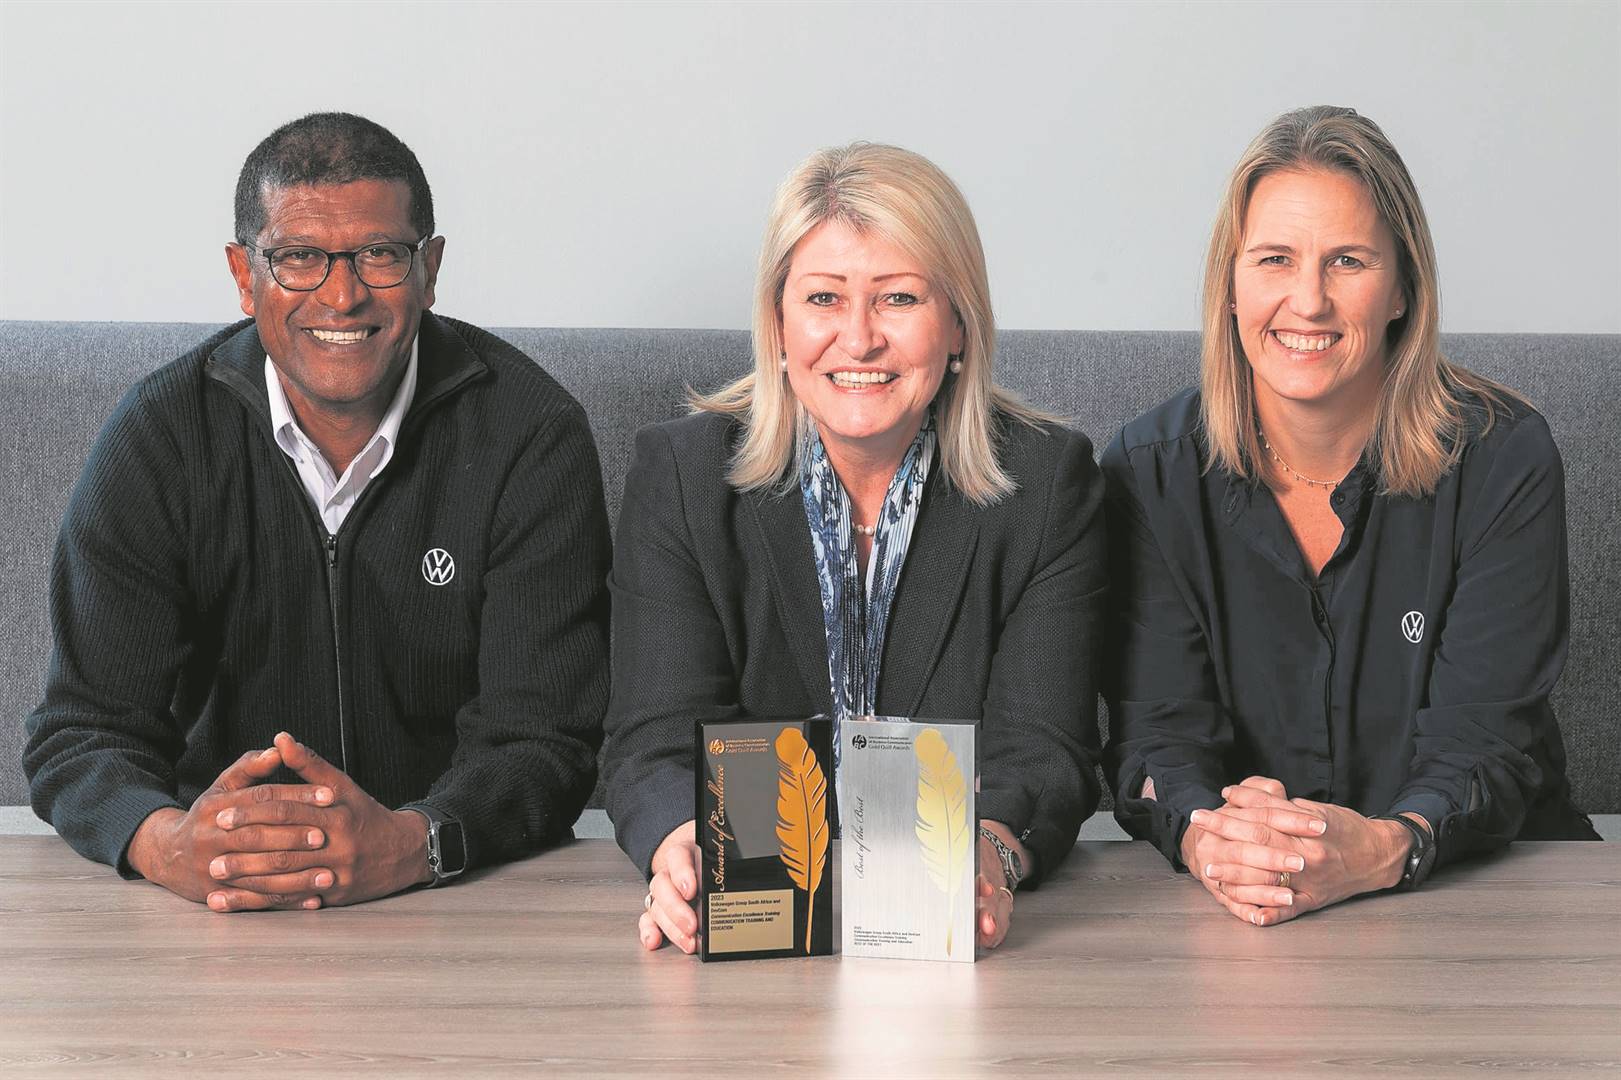 A proud moment for the Volkswagen team. From the left are Ashwin Harri, Production Division Head, Margaret Loughead, Internal Communication Specialist and Liza Wilmot, Production Academy Manager. 